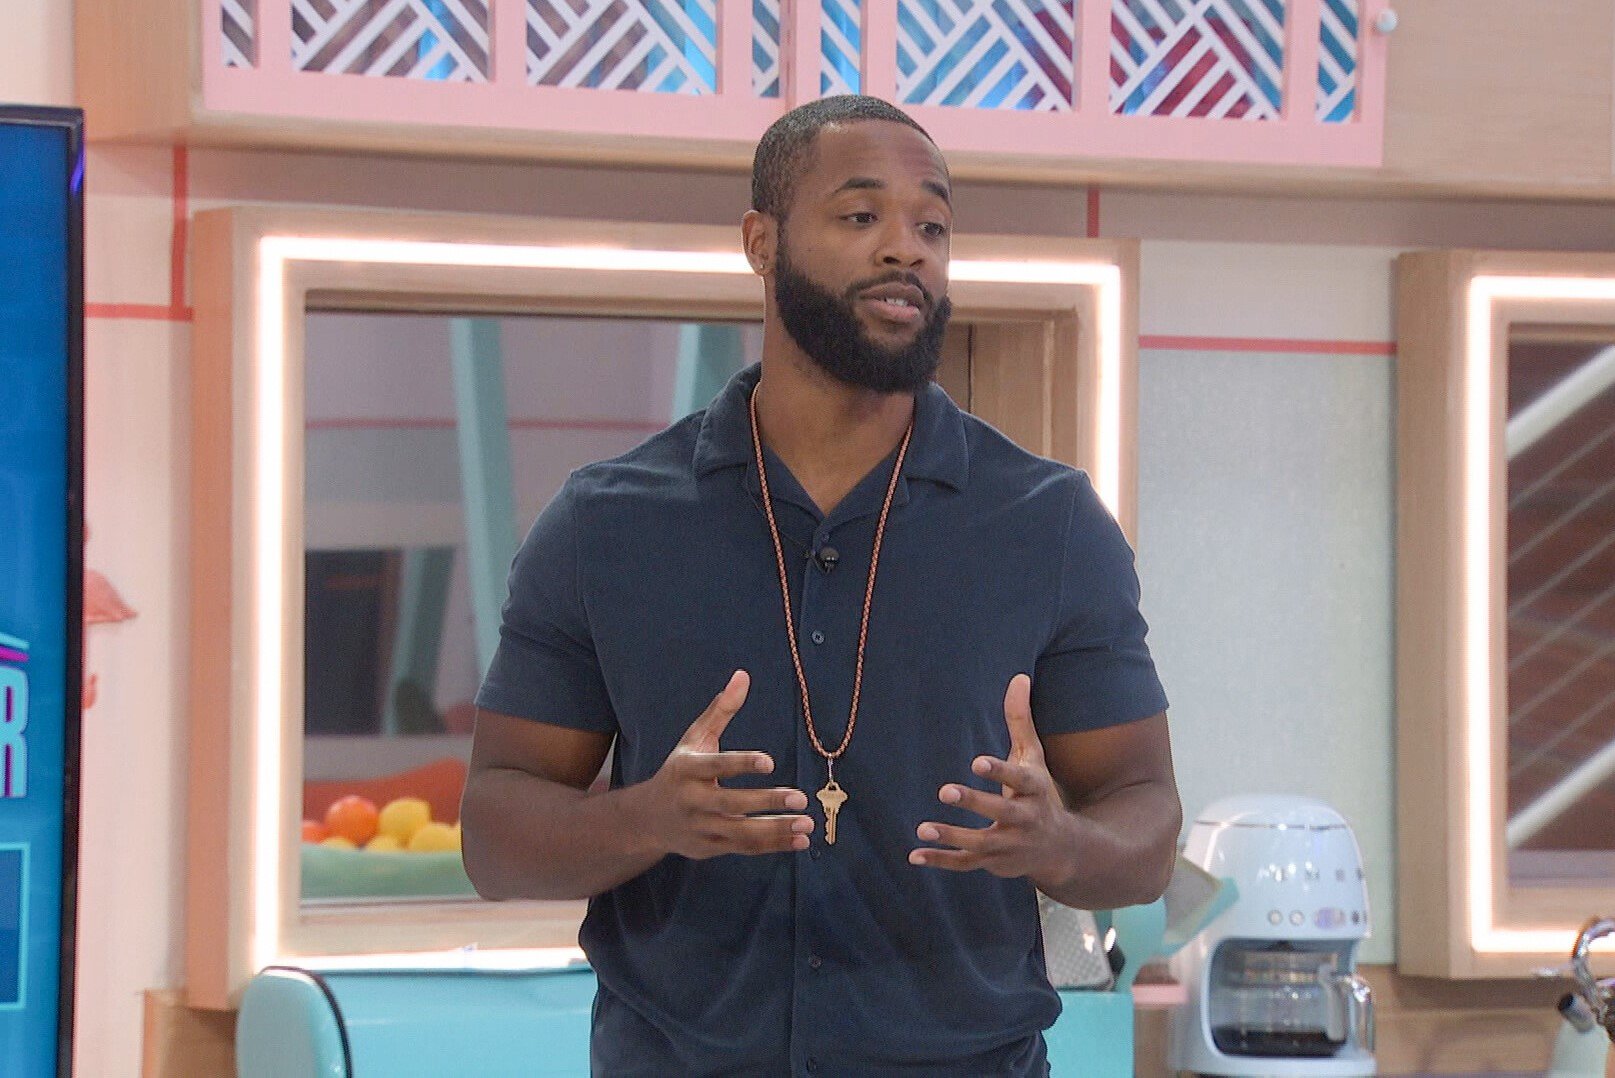 According to 'Big Brother 24' spoilers, Monte Taylor won Head of Household and nominated Alyssa Snider and Indy Santos for eviction. Monte wears a dark blue shirt and the HOH key around his neck.